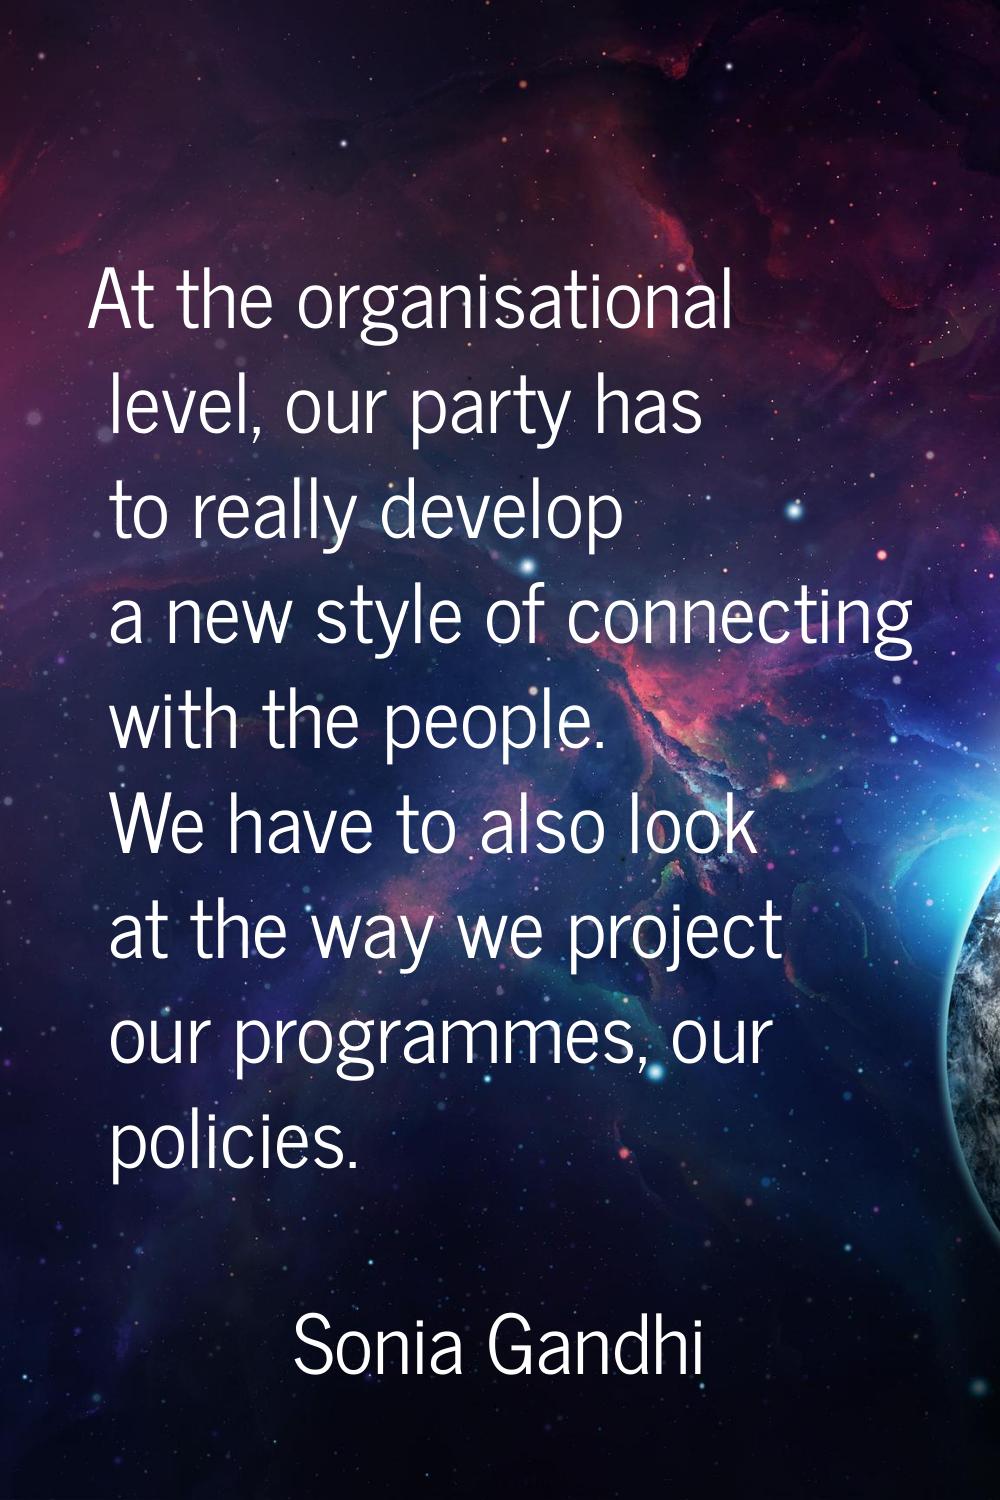 At the organisational level, our party has to really develop a new style of connecting with the peo